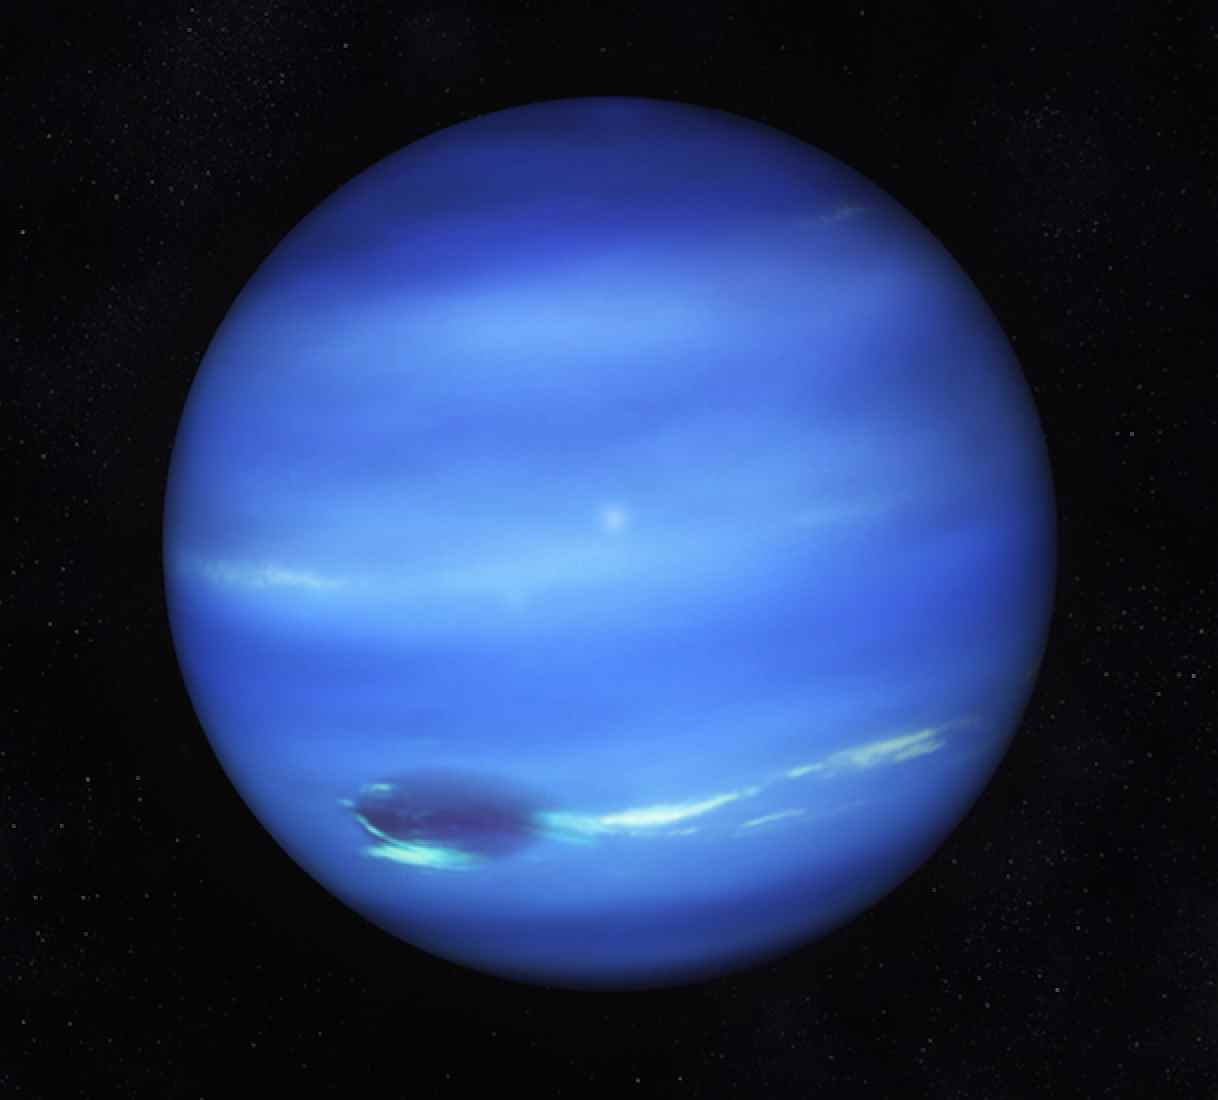 The oscillations of the Sun are reflected by the planet Neptune